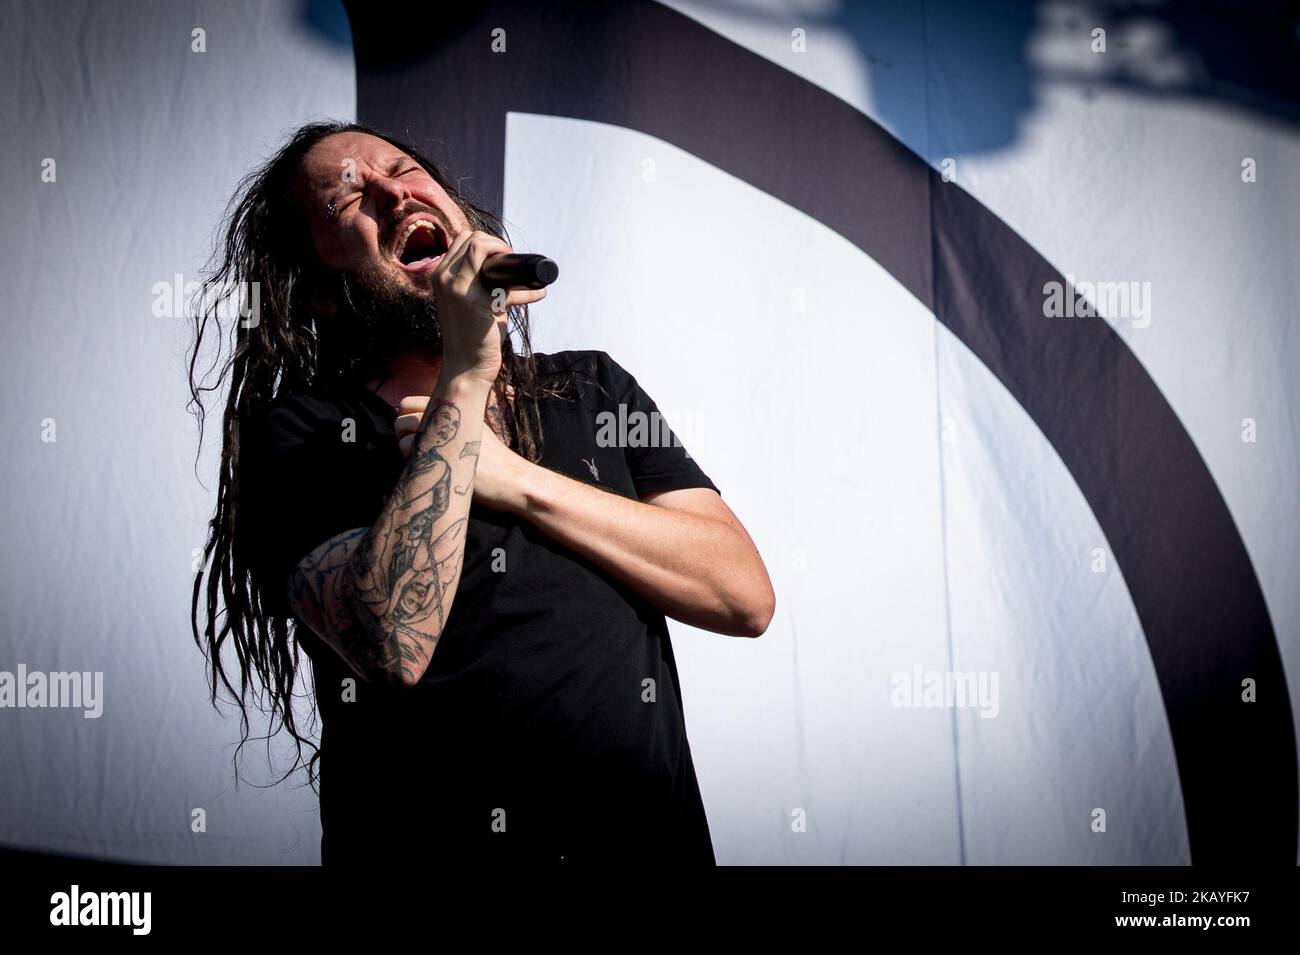 American singer and musician Jonathan Davis best known as the lead vocalist and frontman of Nu Metal band Korn performs live on stage during Firenze Rocks festival at Visarno Arena , Florence, Italy on 16 June 2018. (Photo by Giuseppe Maffia/NurPhoto) Stock Photo